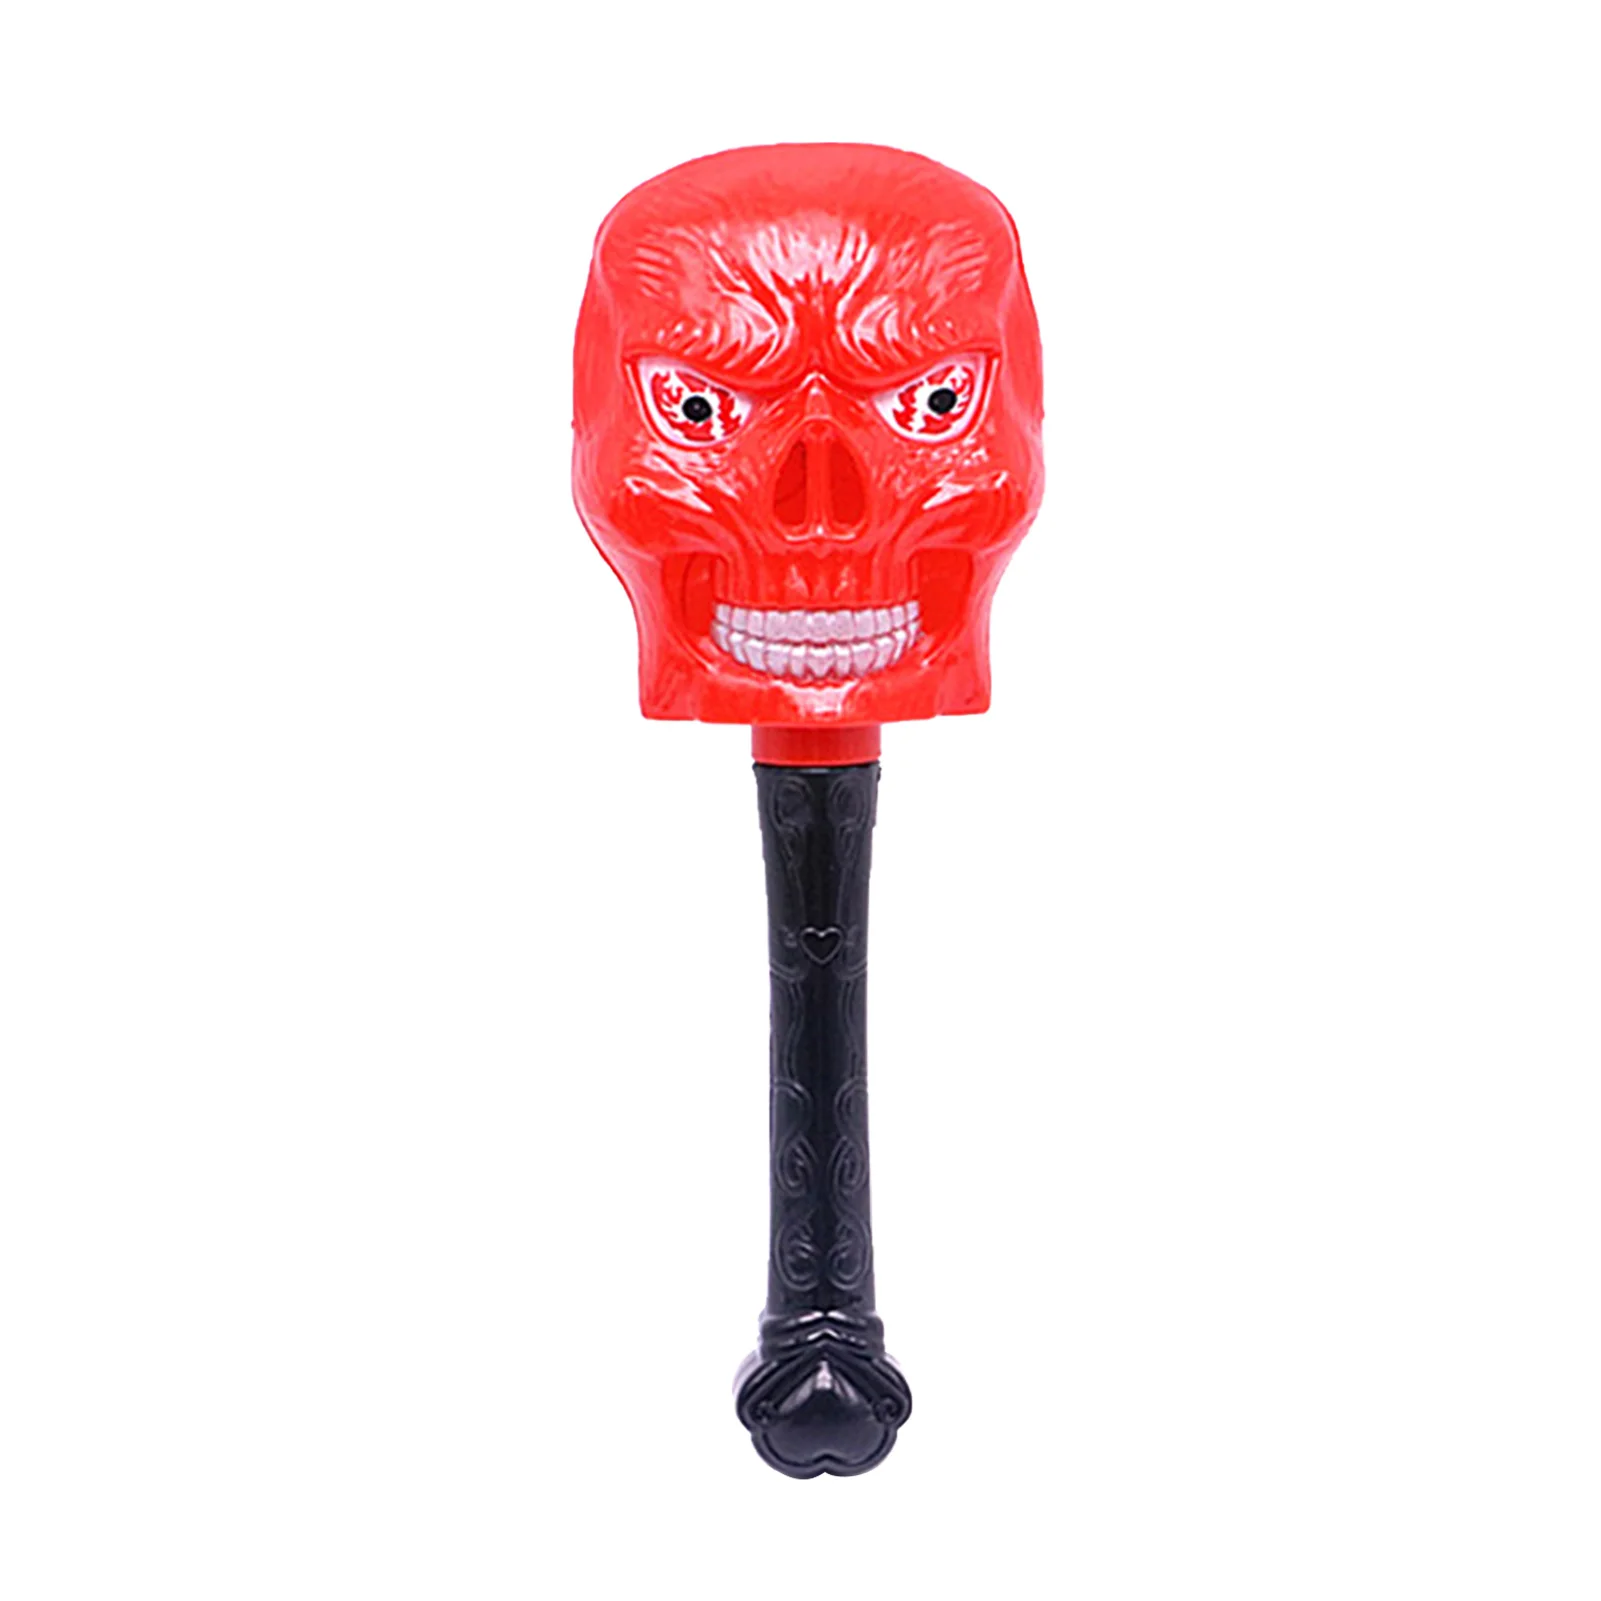 

Halloween Glow Witch Skeleton Prop Gift Horror Kids Toy Flashing Scary Luminous 3 Modes Festival for Magic Stick Home Decoration